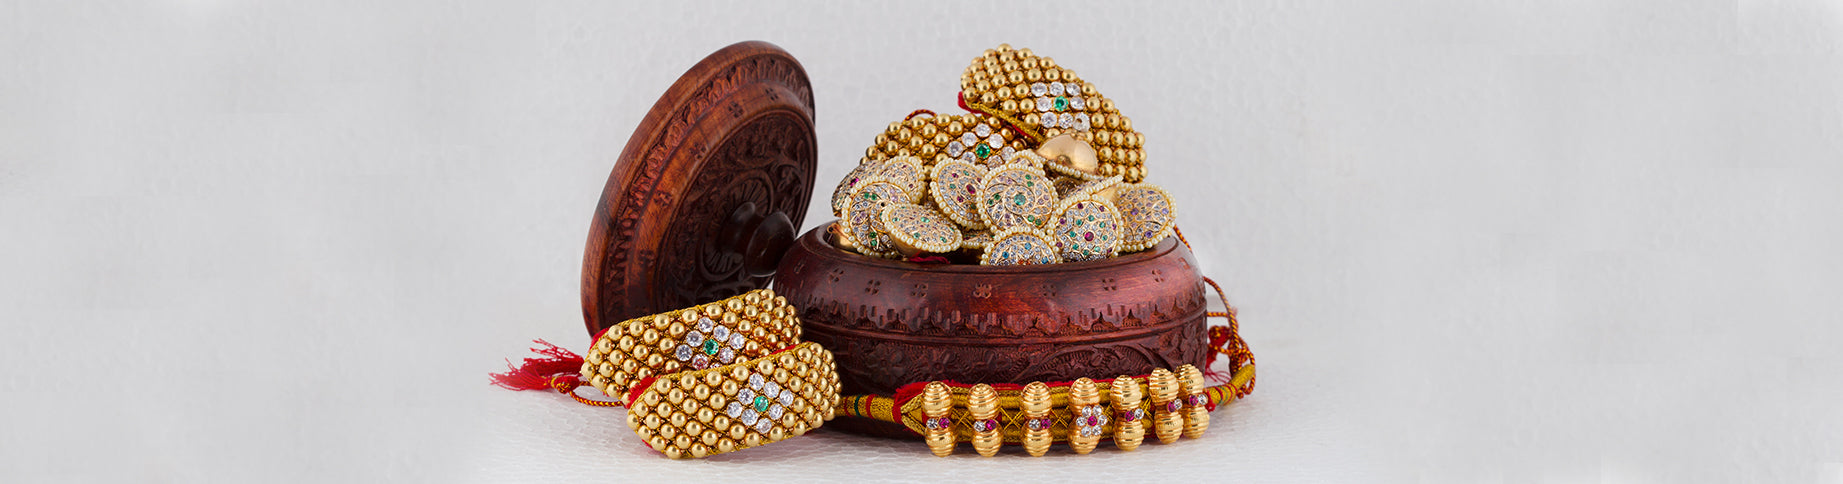 How to Properly Store Your Jewelry - Kandere